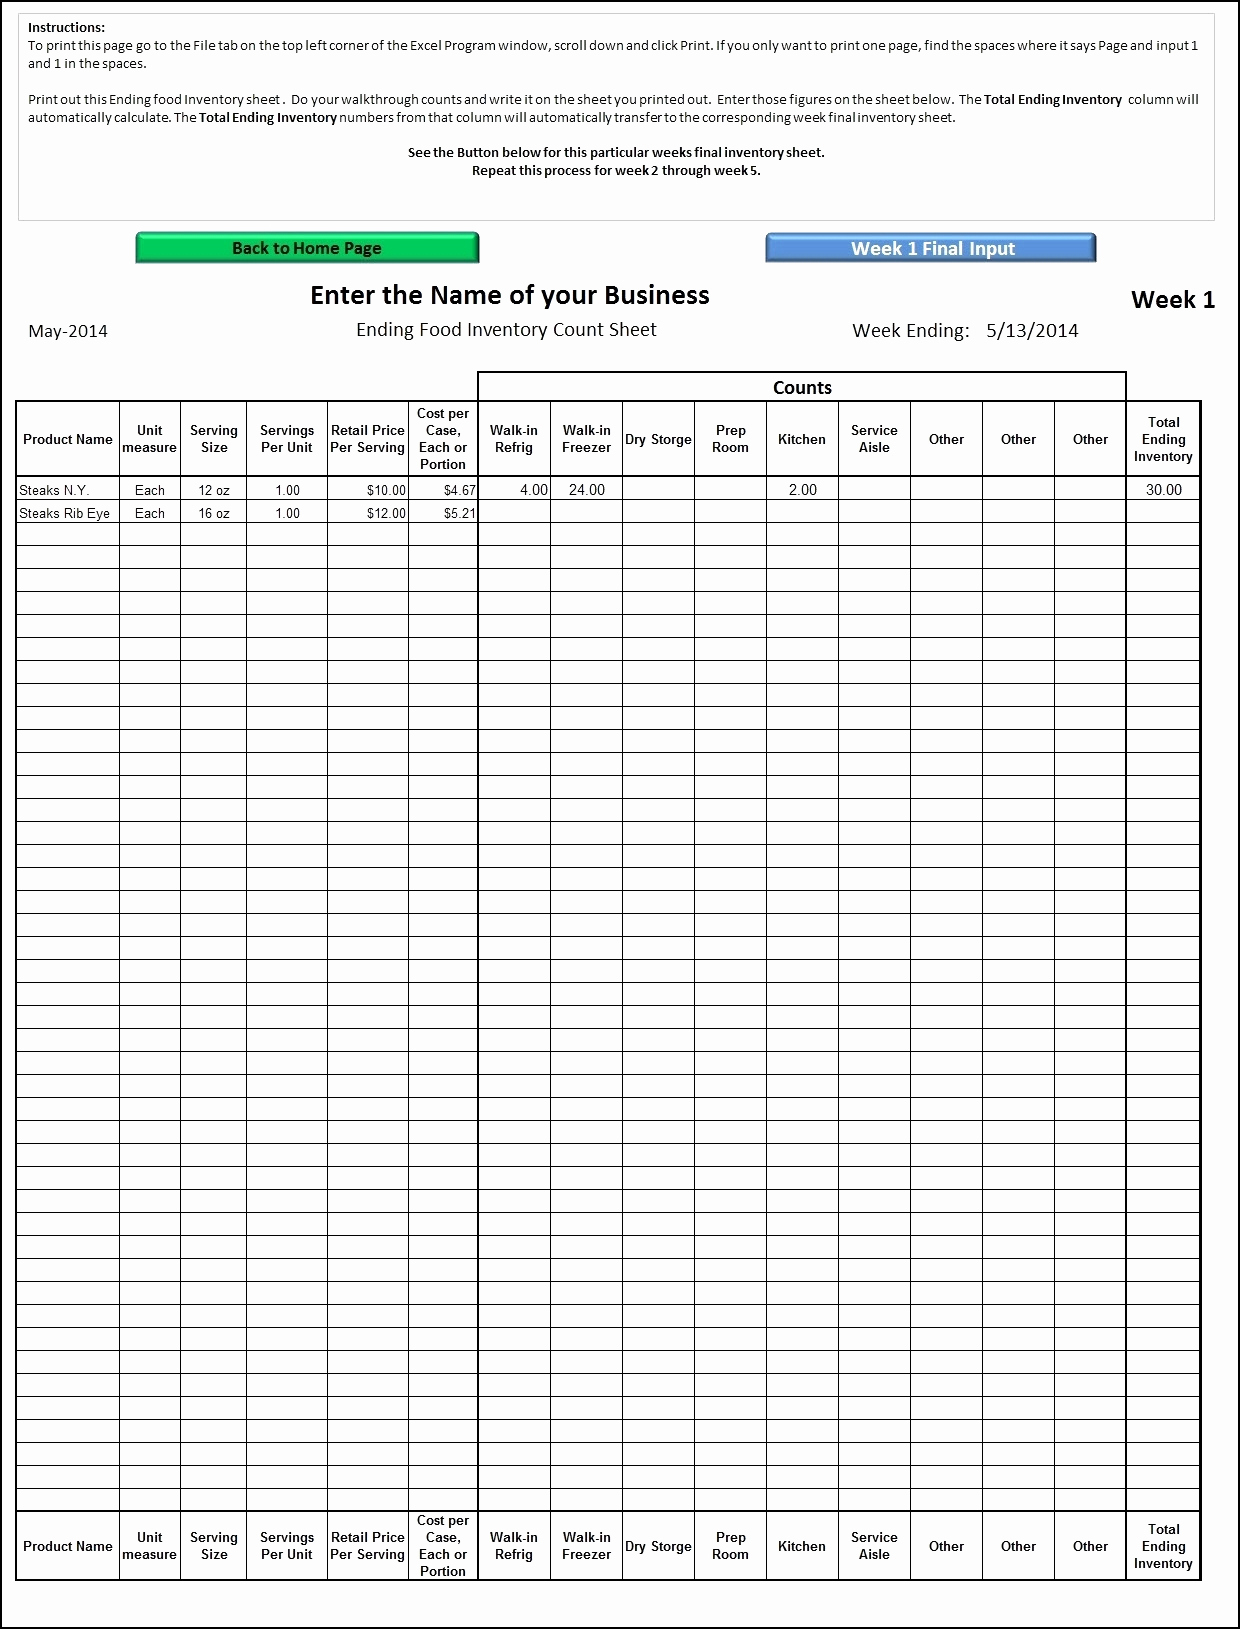 Ppi Claims Calculator Spreadsheet Throughout Food Storage Calculator Spreadsheet – Theomega.ca